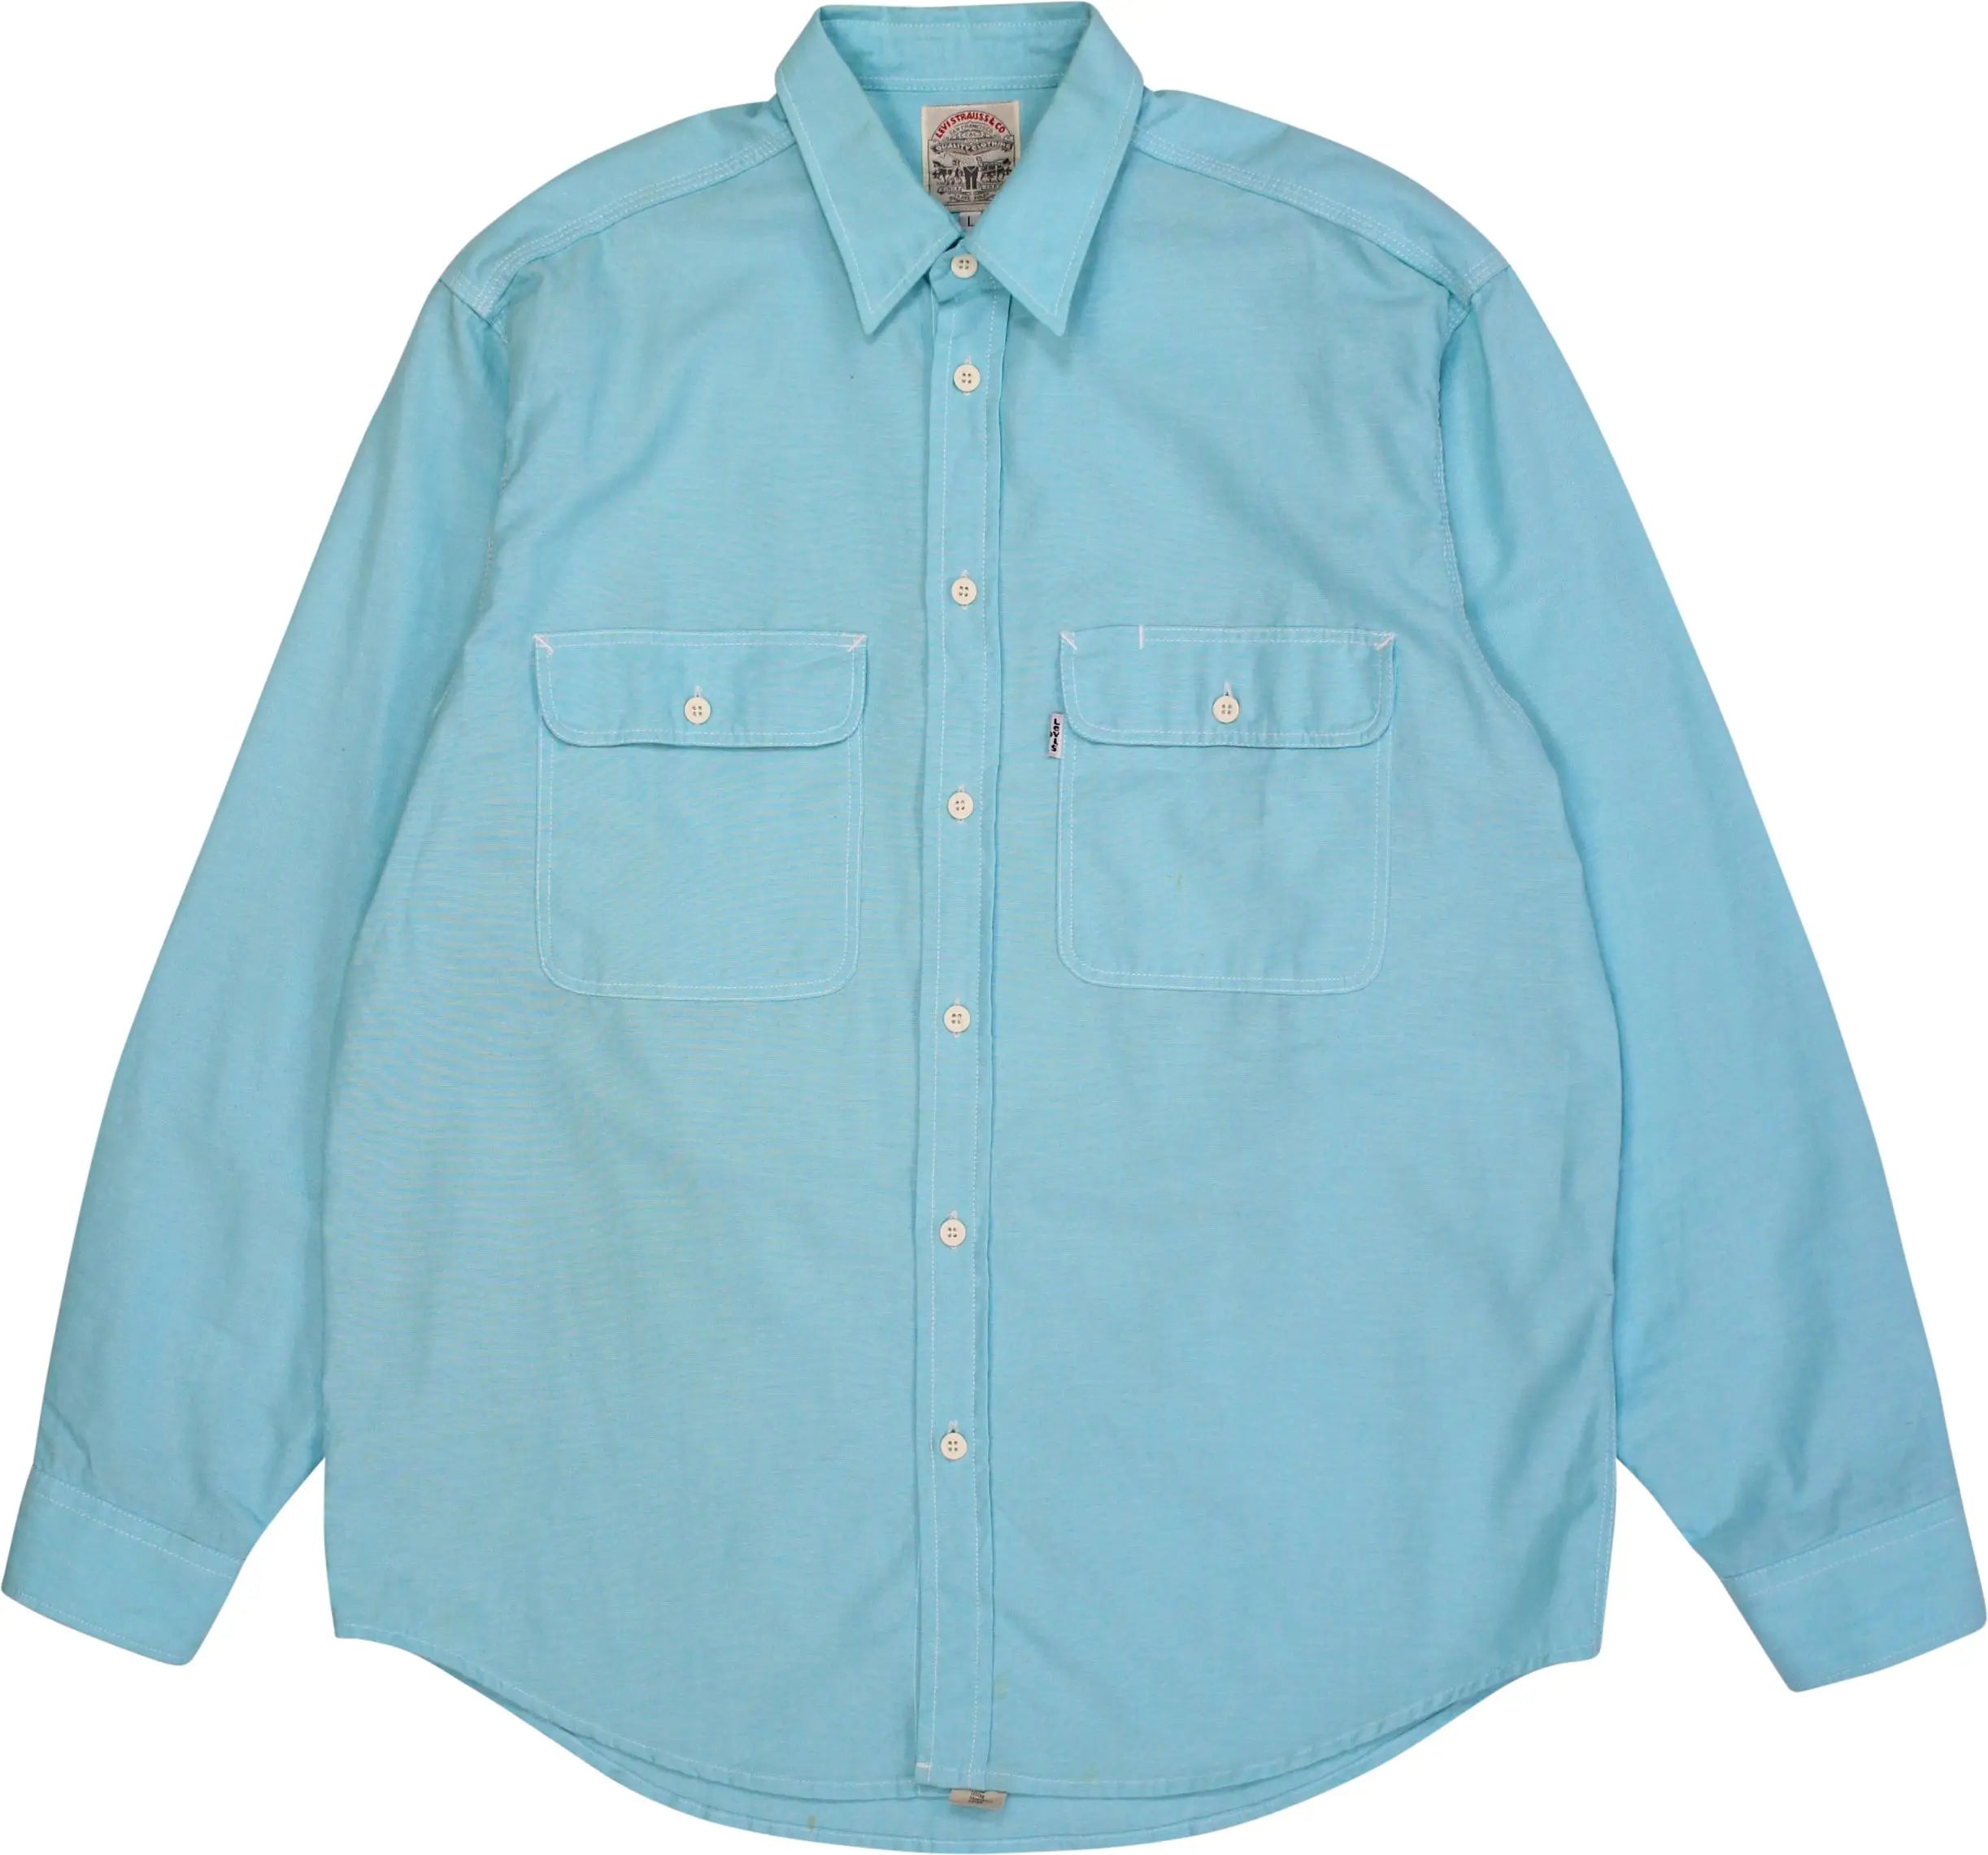 Levi's - Vintage Blue Shirt by Levi's- ThriftTale.com - Vintage and second handclothing